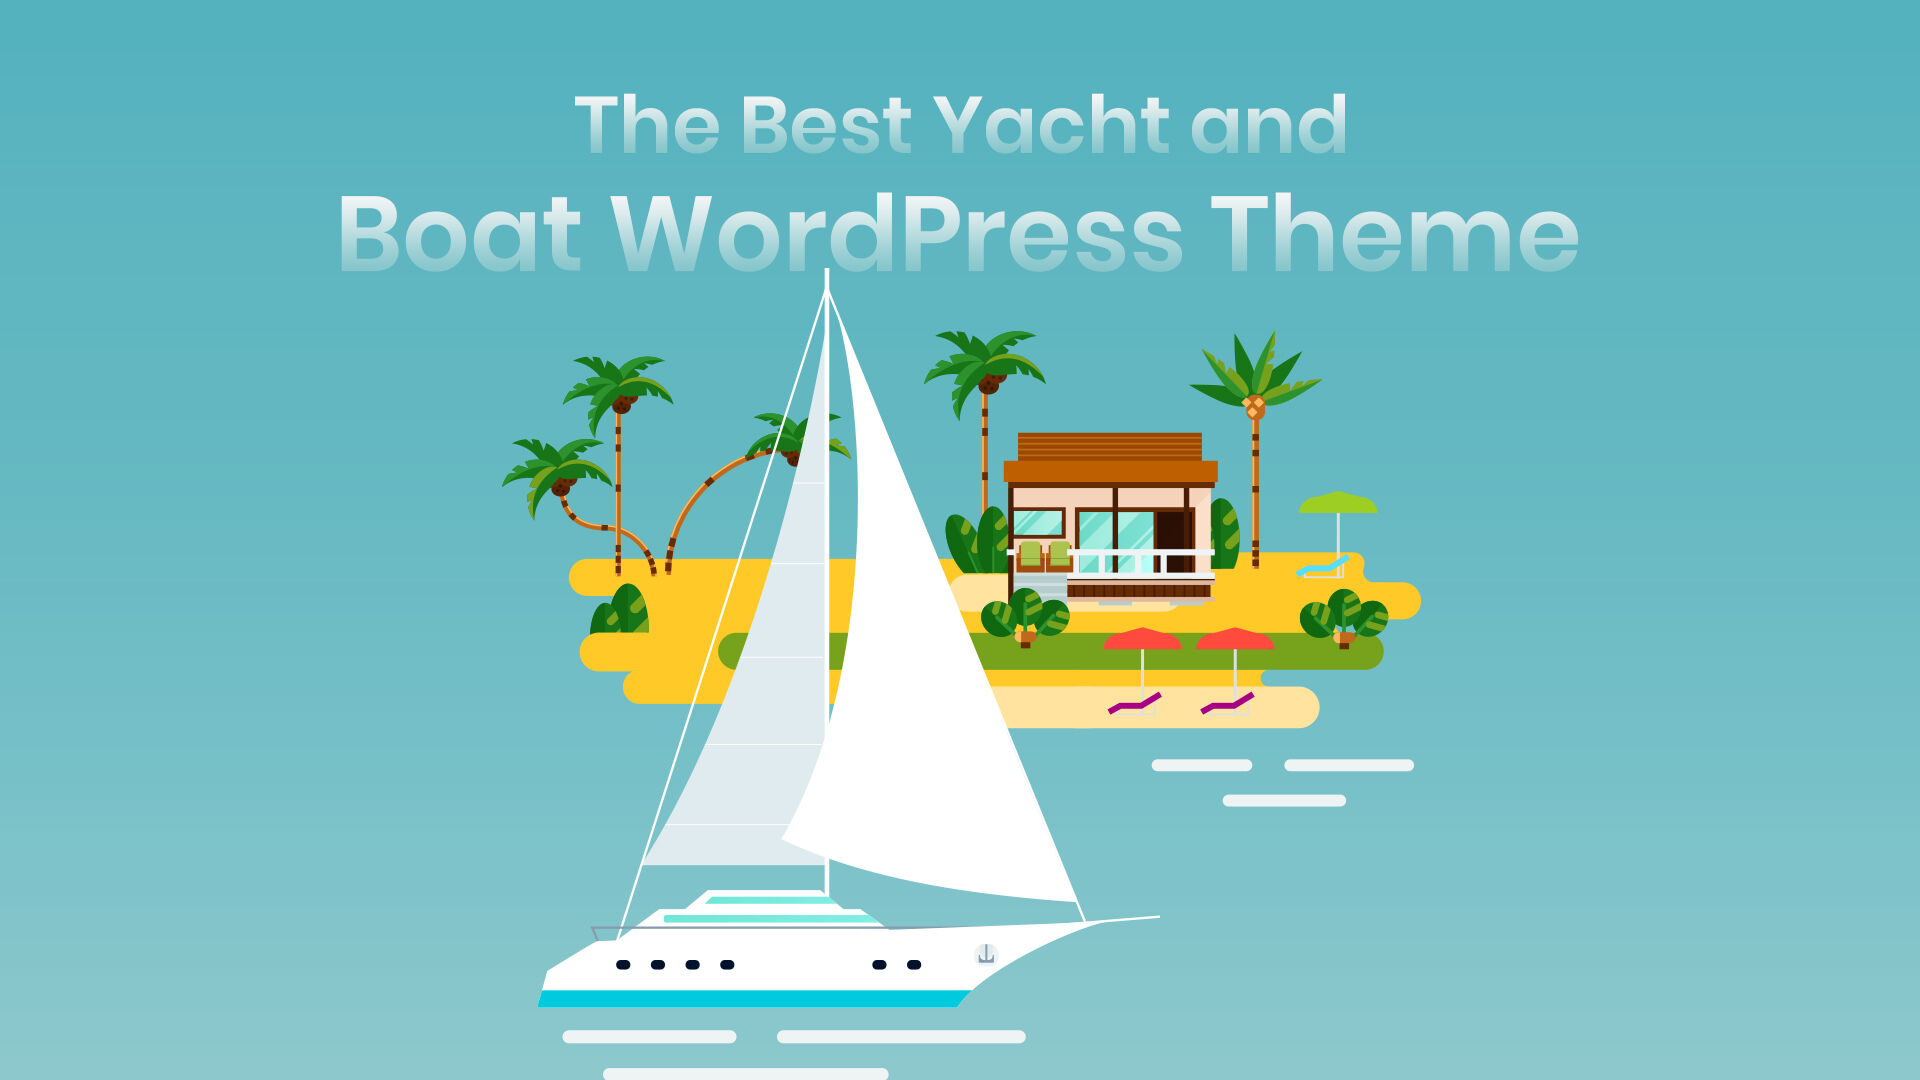 What Factors to Consider while Choosing the Best Yacht and Boat WordPress Theme